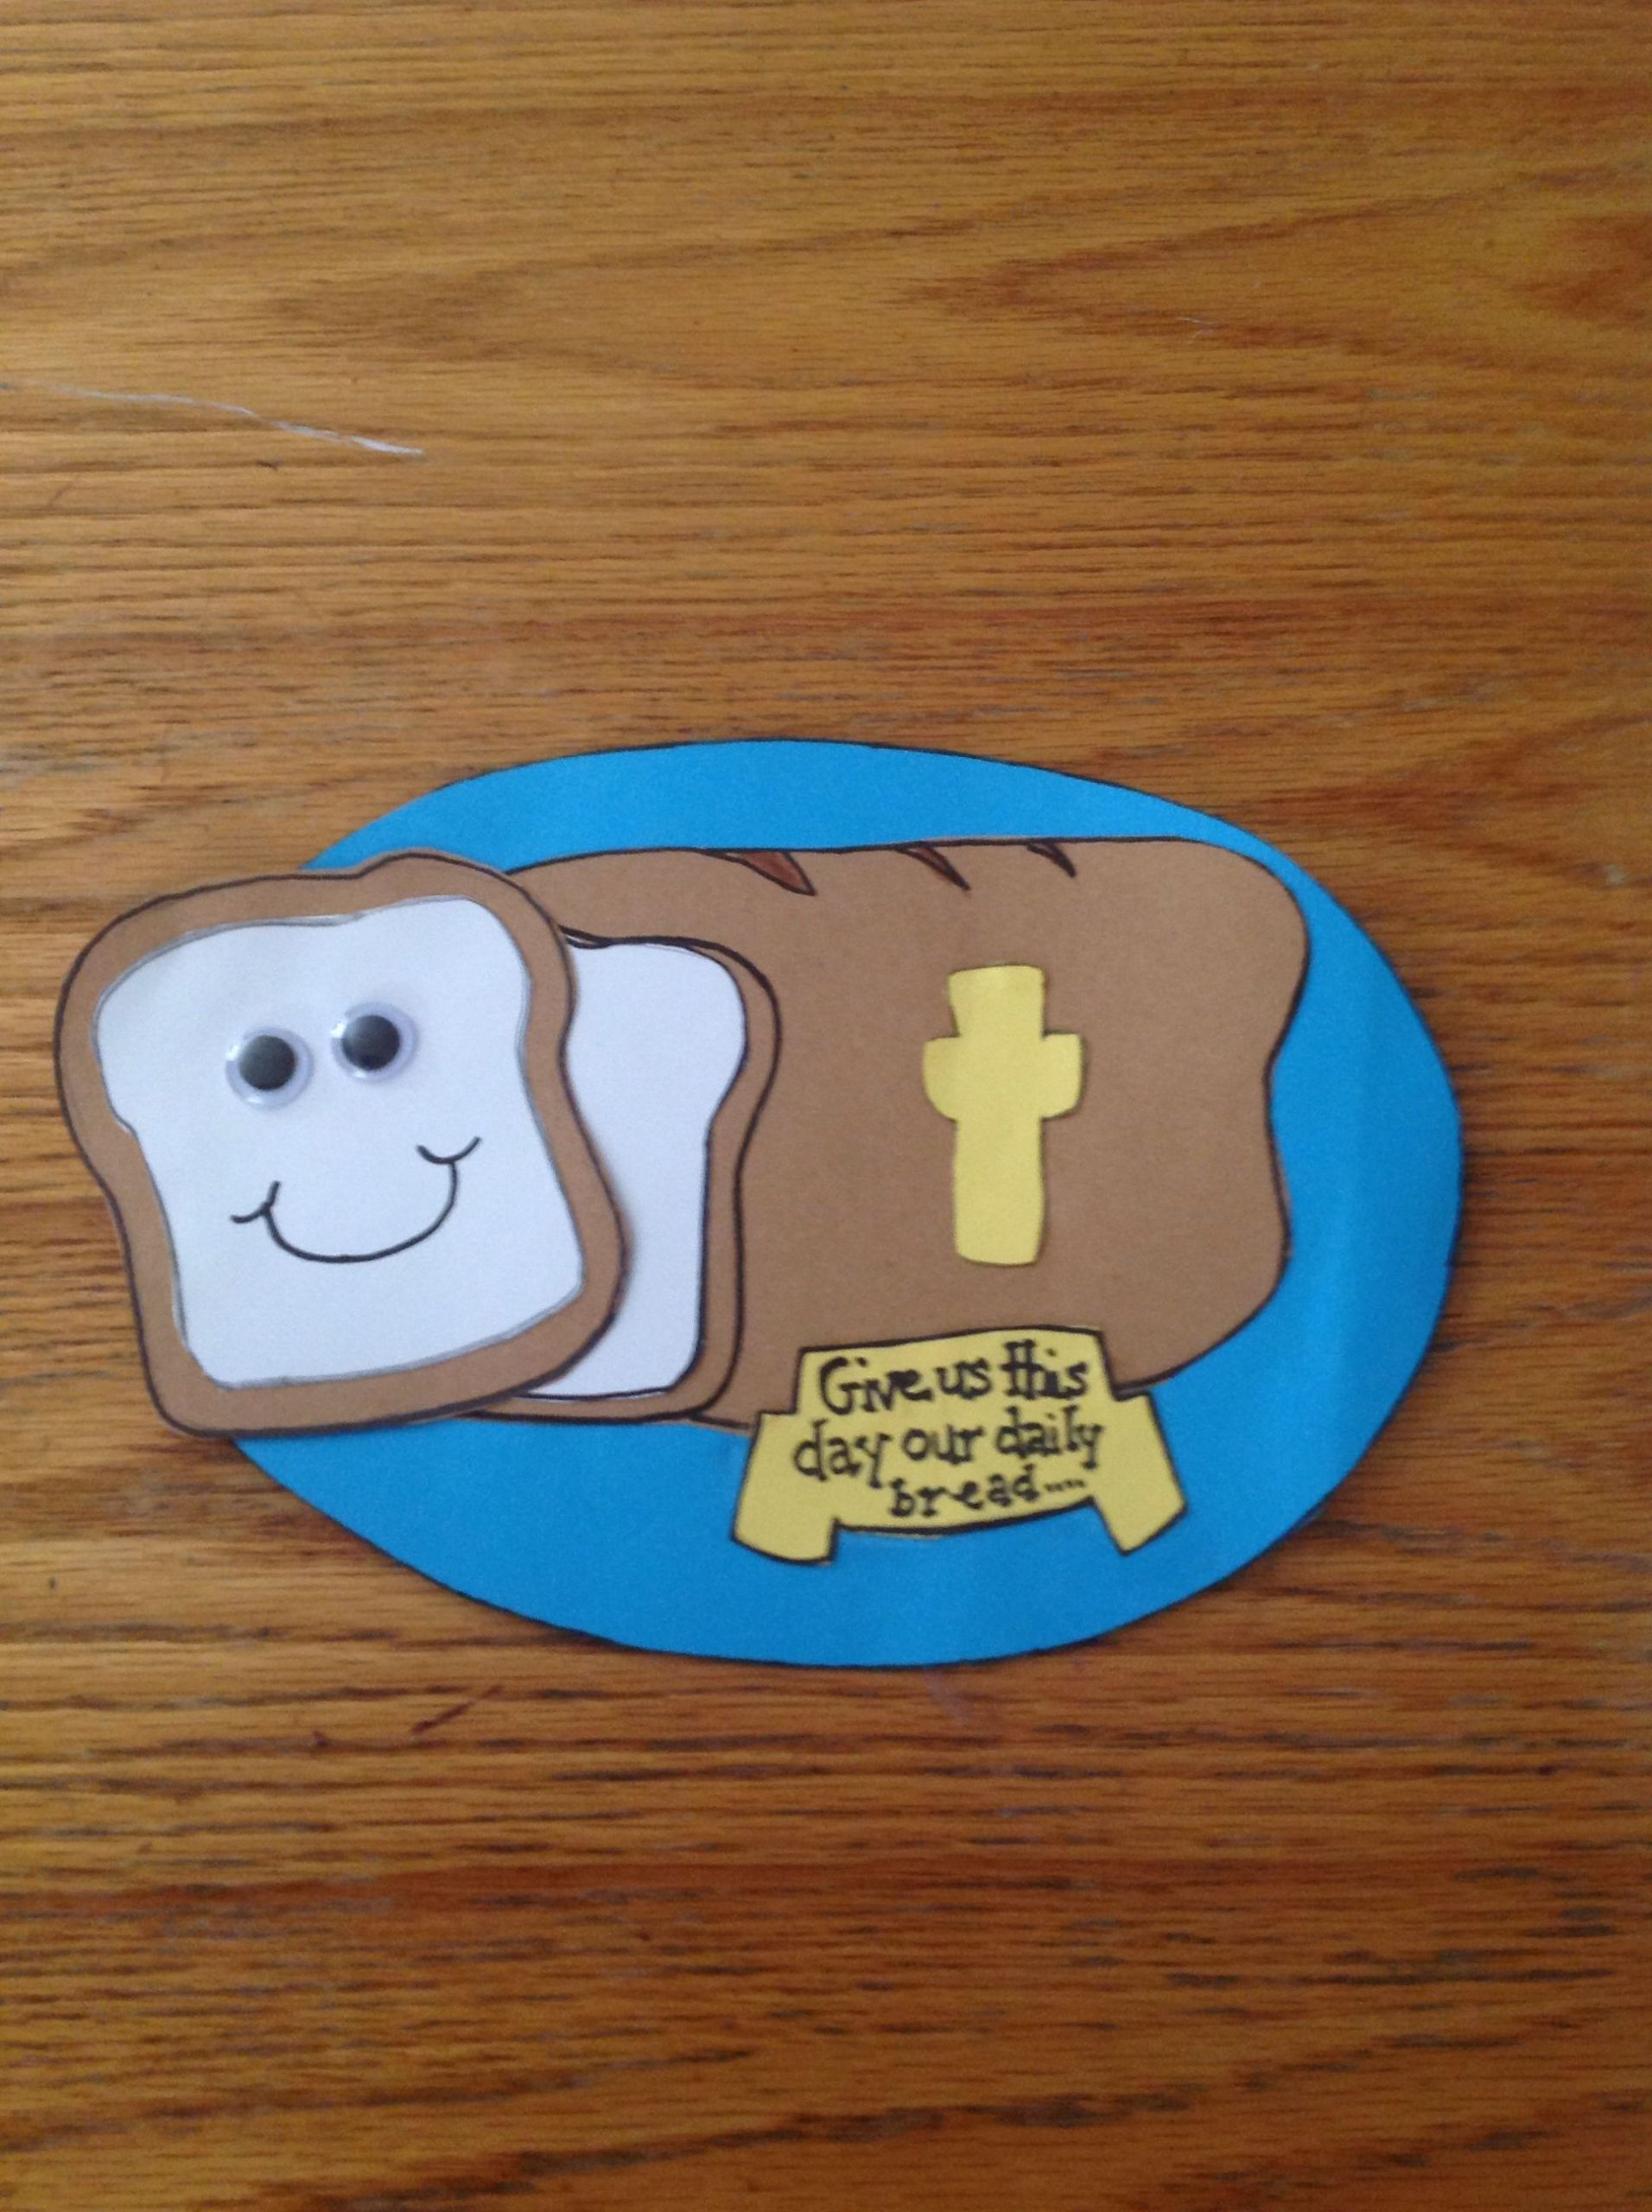 Bible Crafts For Preschoolers
 Our Daily Bread Bible Craft for Kids